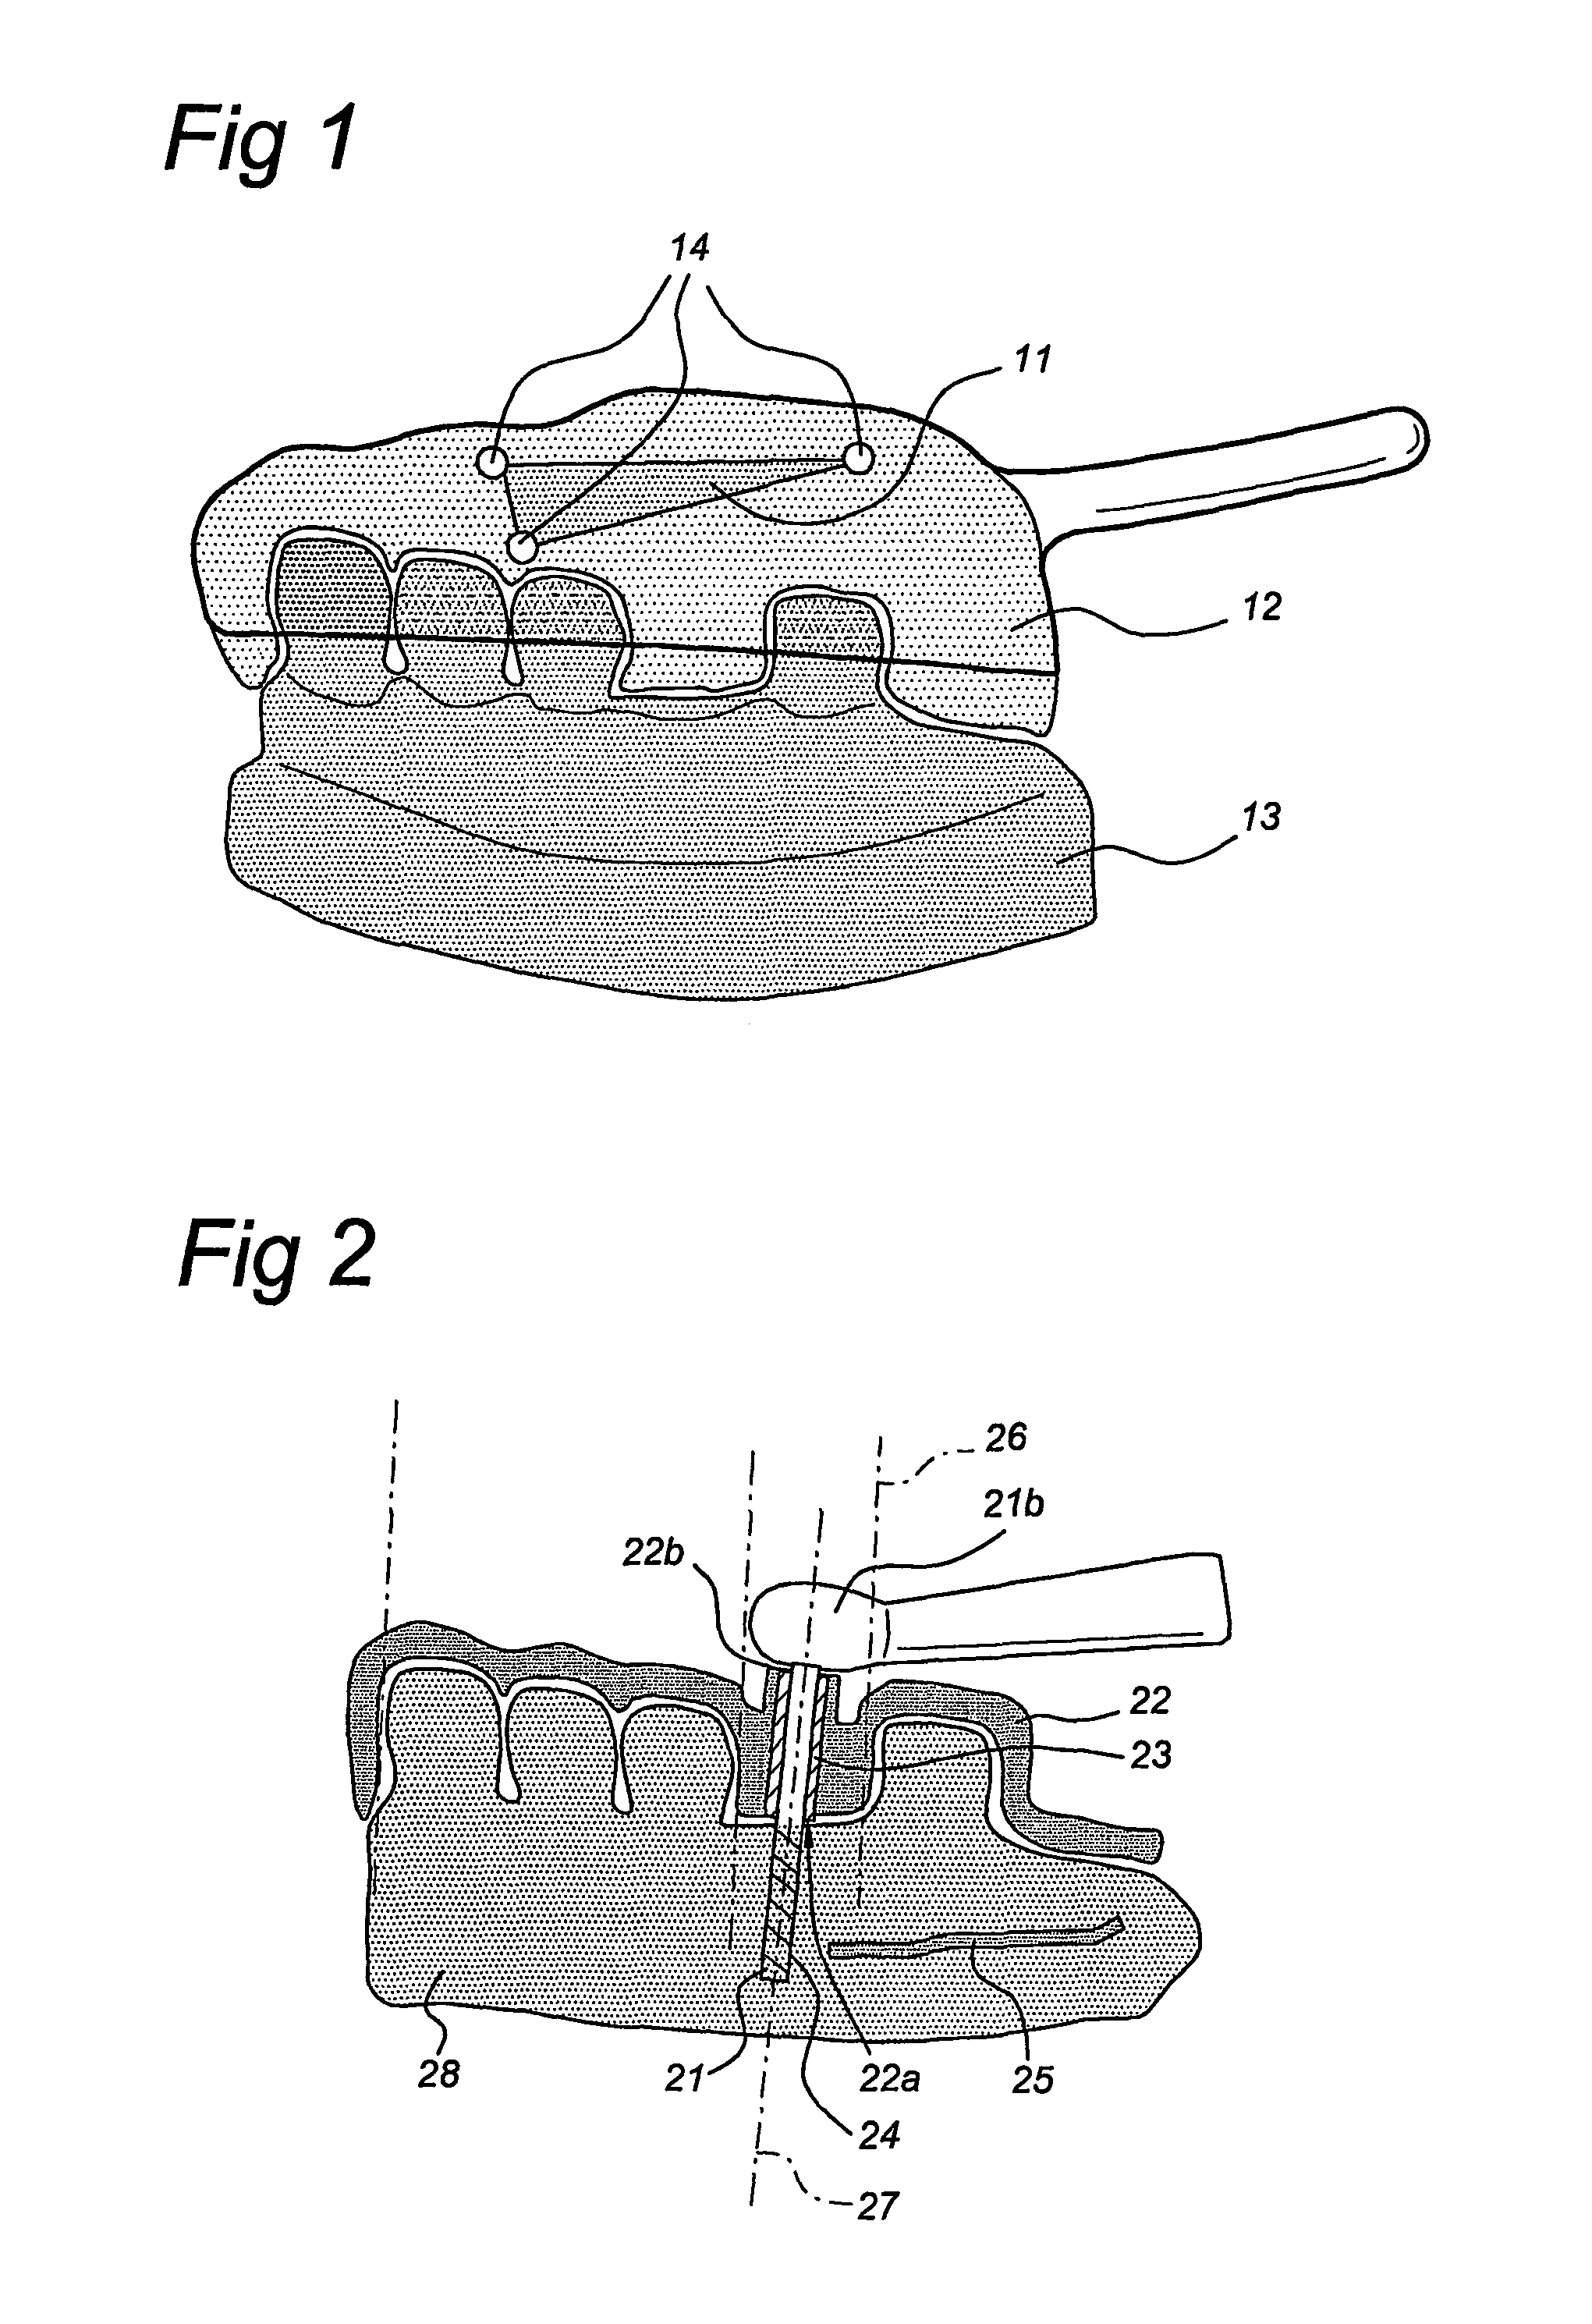 Method of manufacturing and installing a ceramic dental implant with an aesthetic implant abutment